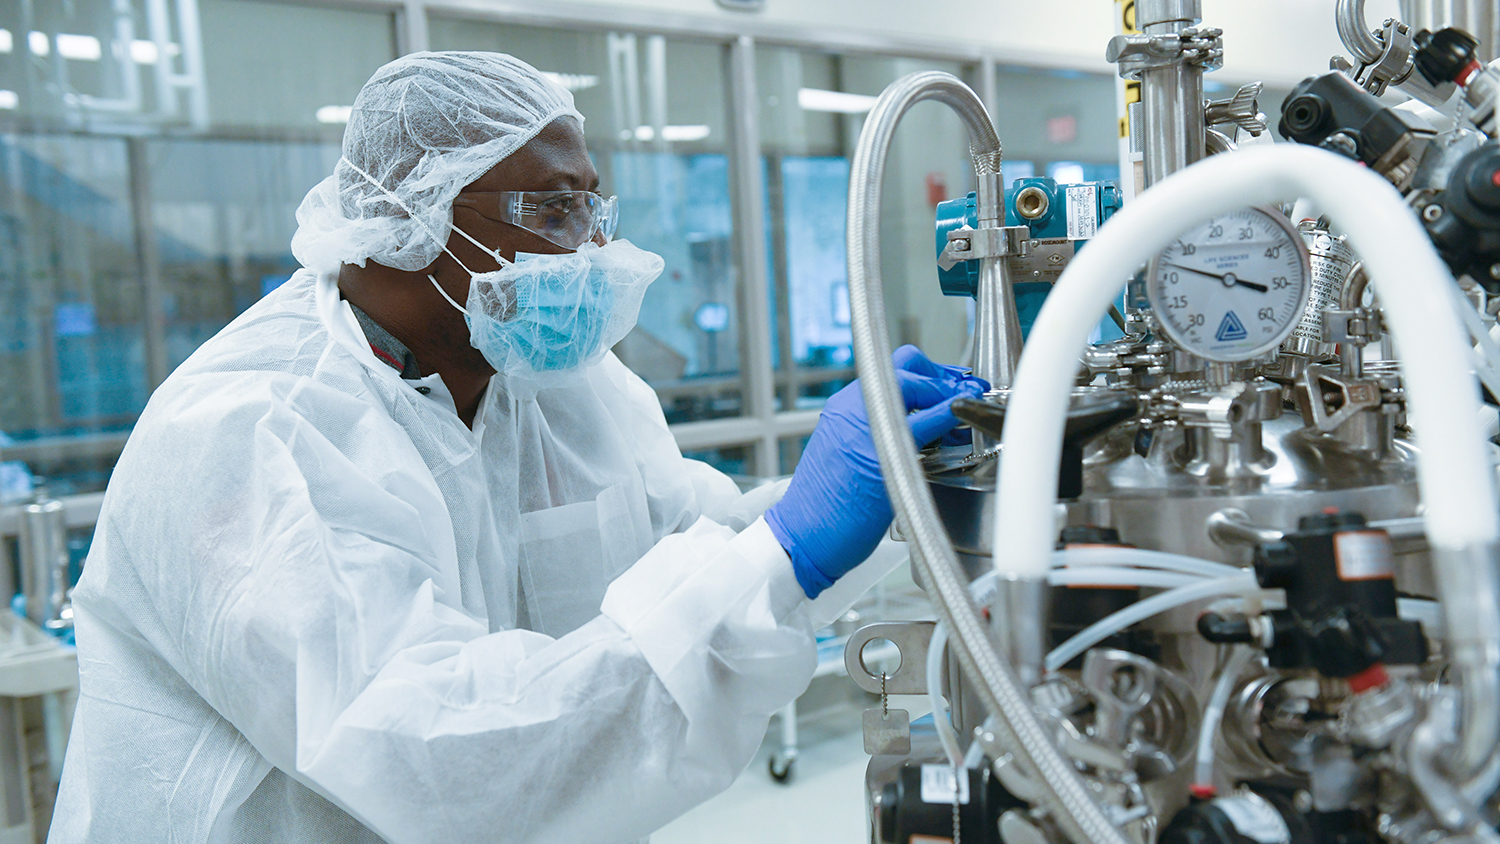 African American researcher dressed in full protective gear working in the lab.